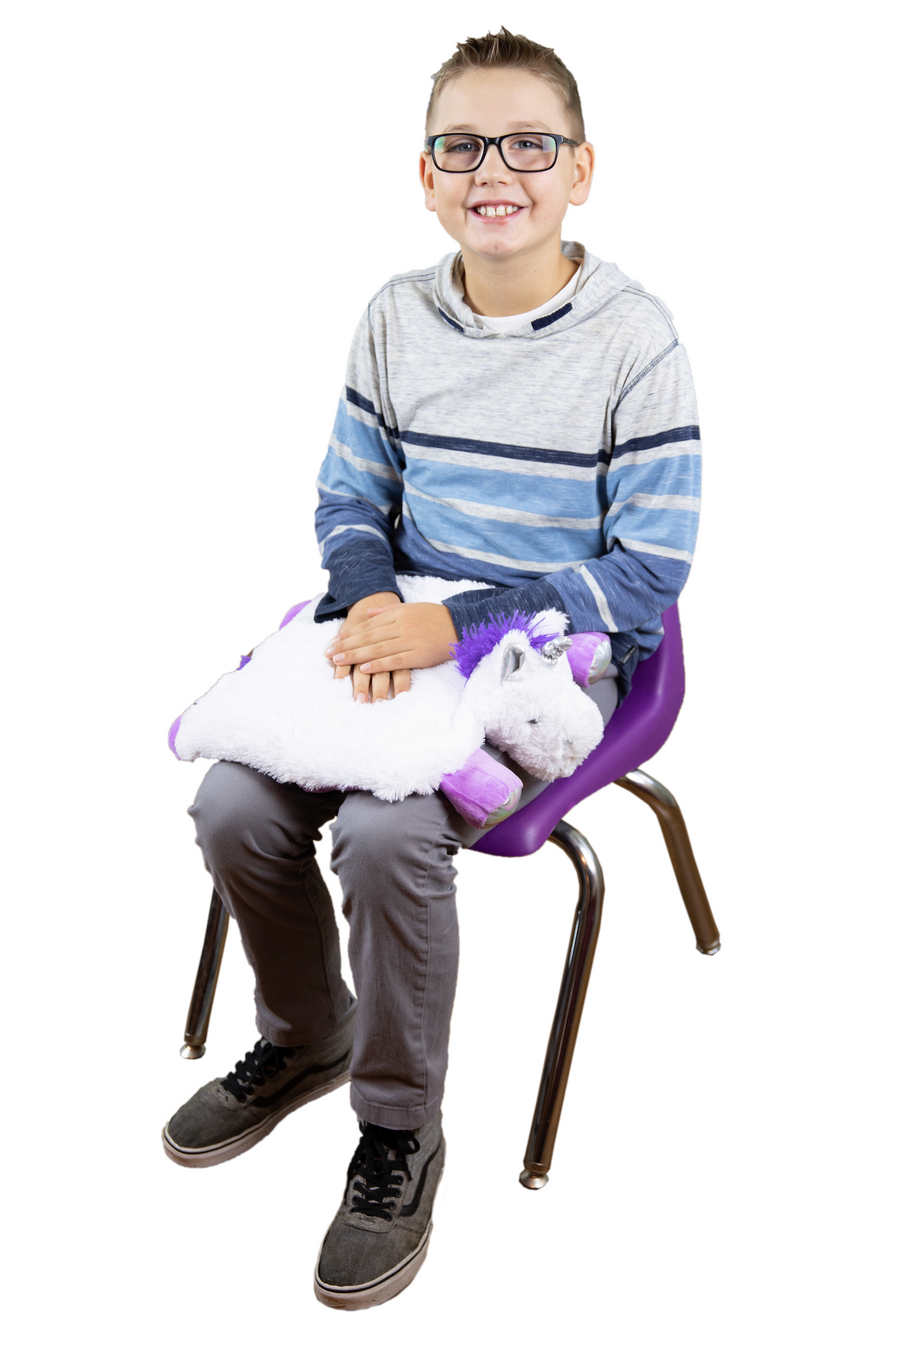 Wiggle Seat Big Portable Sensory Chair Cushion for Elementary/Middle/High  School Kids by Bouncyband®